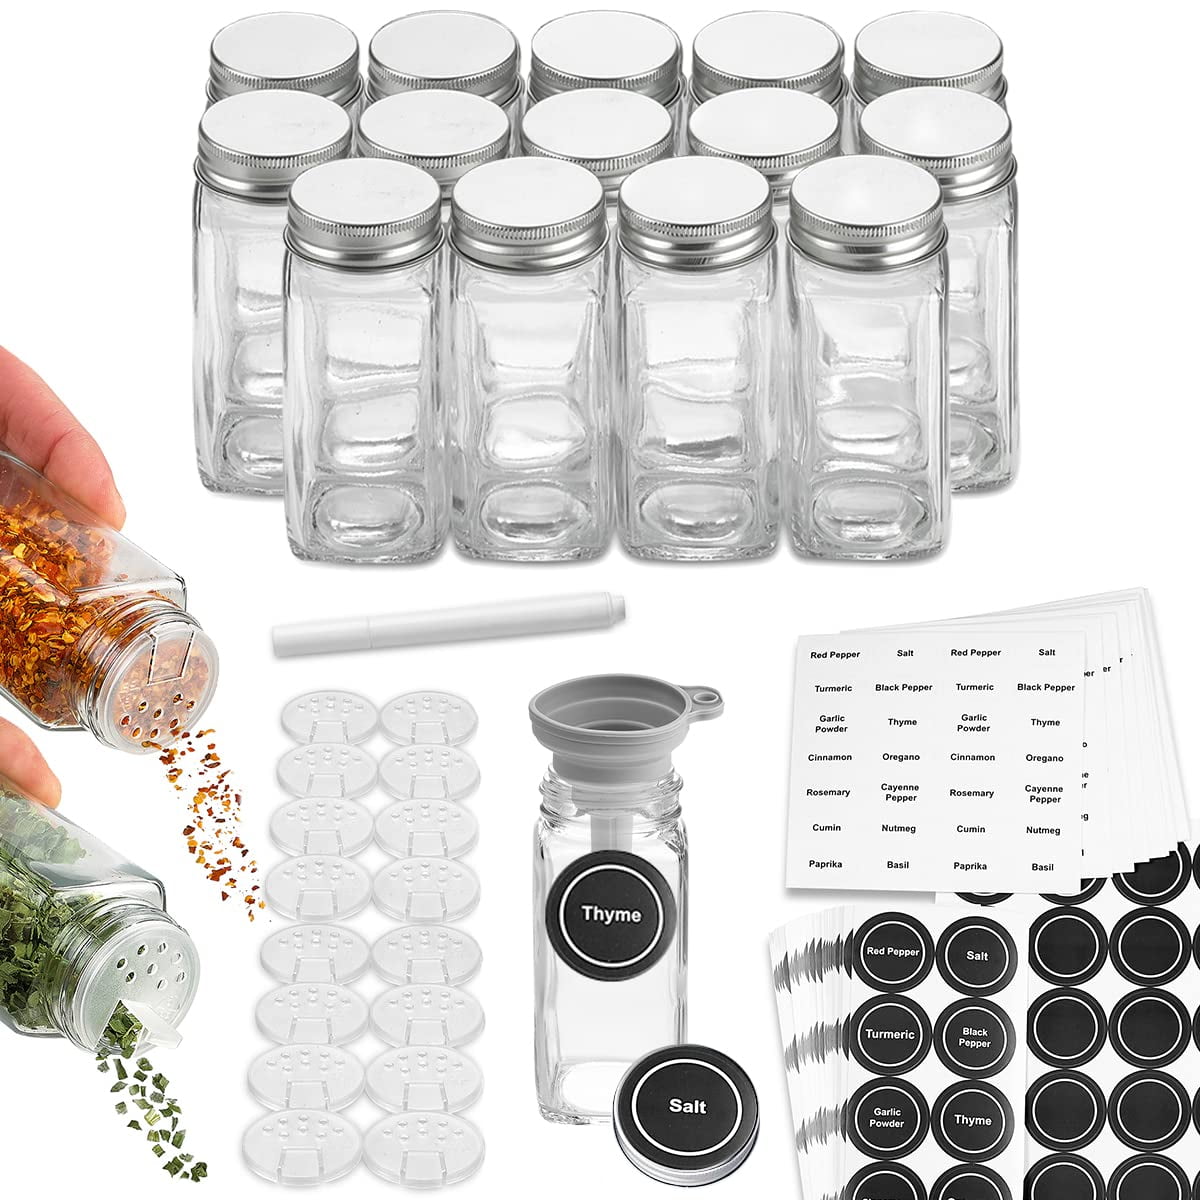 28 Pcs Glass Spice Jars with Label, 4 Oz Gold Caps Spice Jars with Lids,  Spice Container Condiment Pot With White Printed Spice Labels, Empty Spice